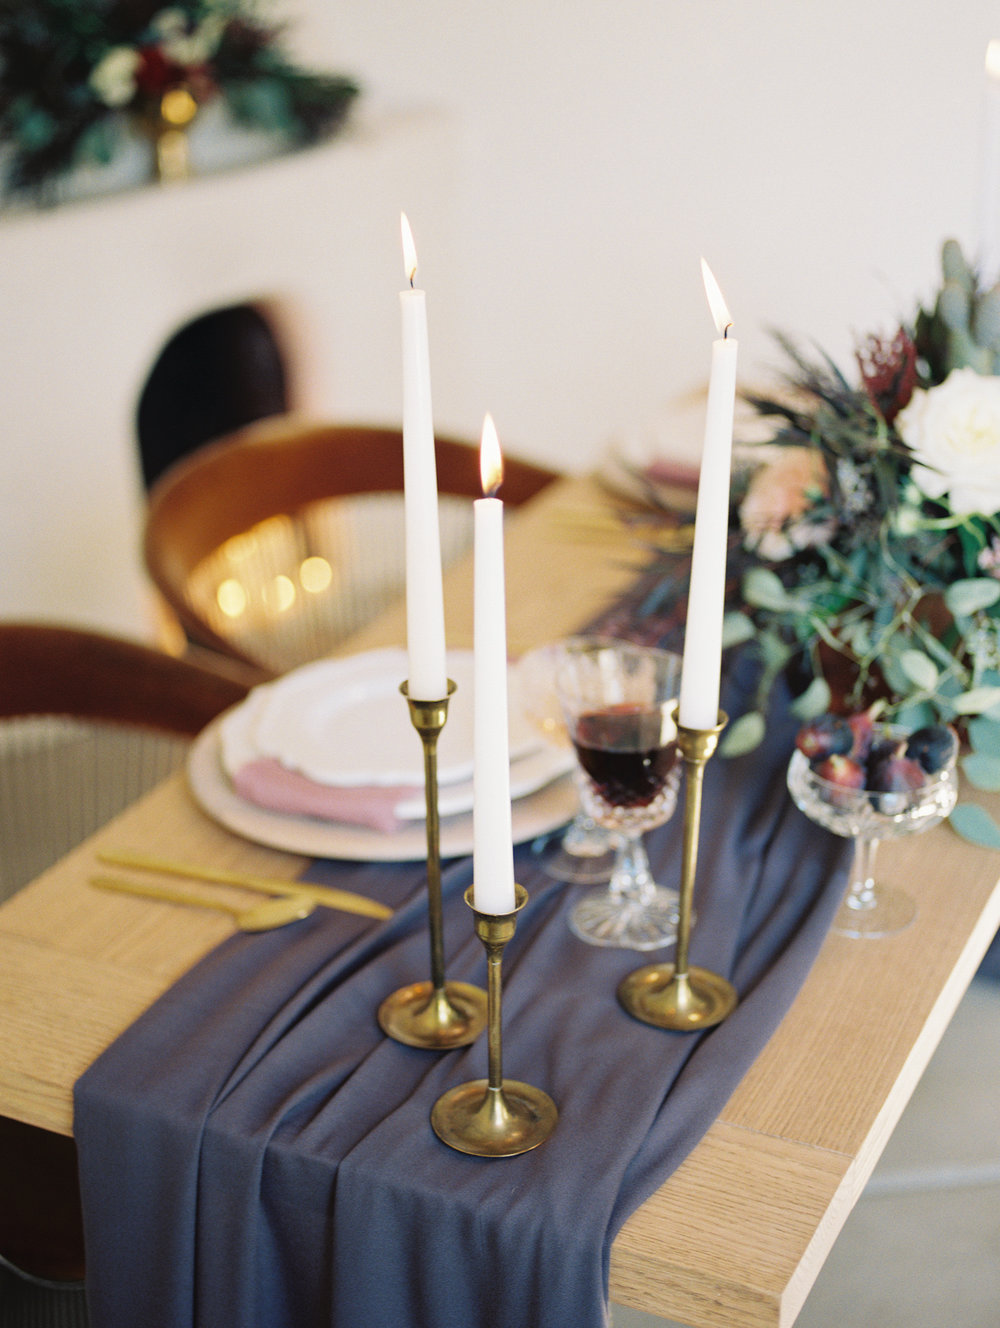  table setting with tall white tapered candles in brass candlesticks and a plum table runner&nbsp; 